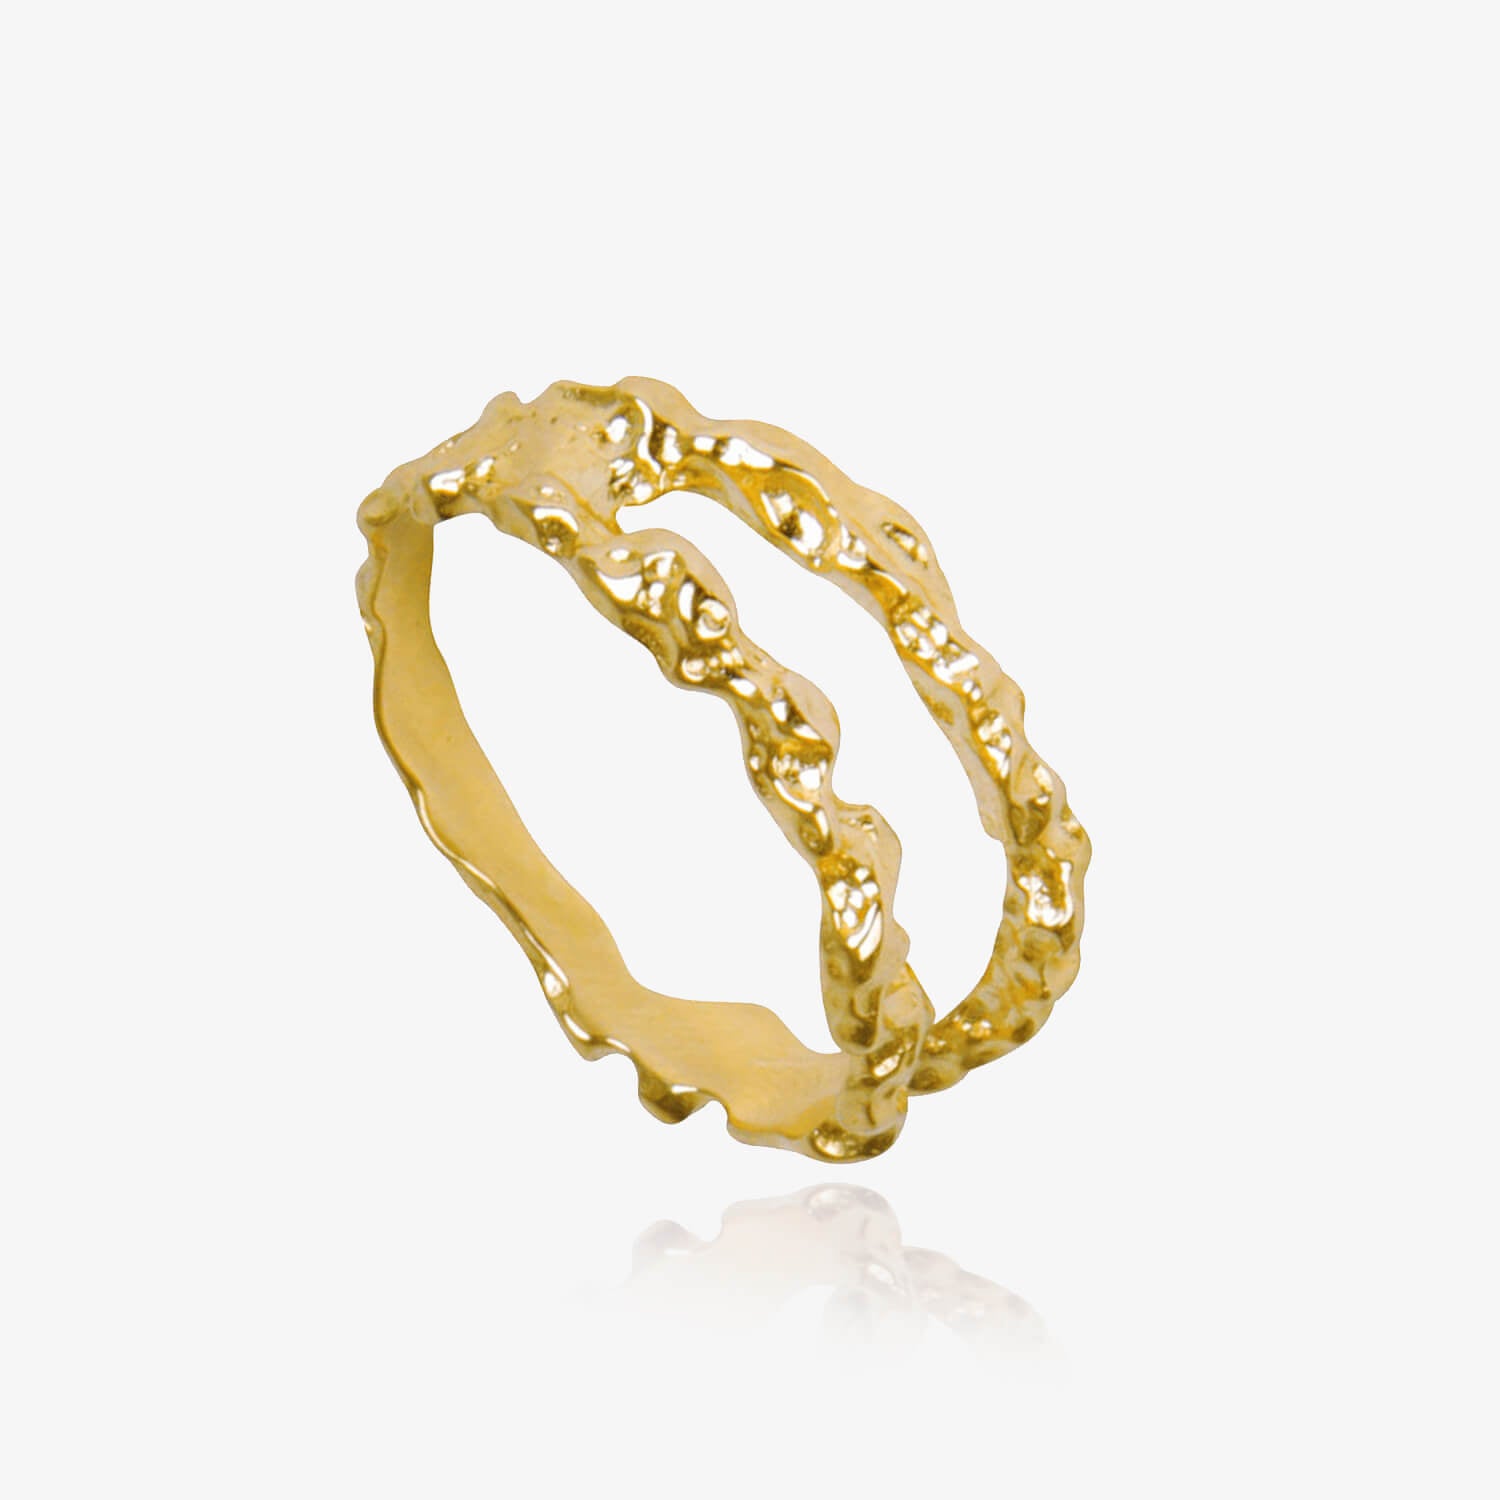 Double band ring with interesting textured detail by Matthew Calvin Jewellery